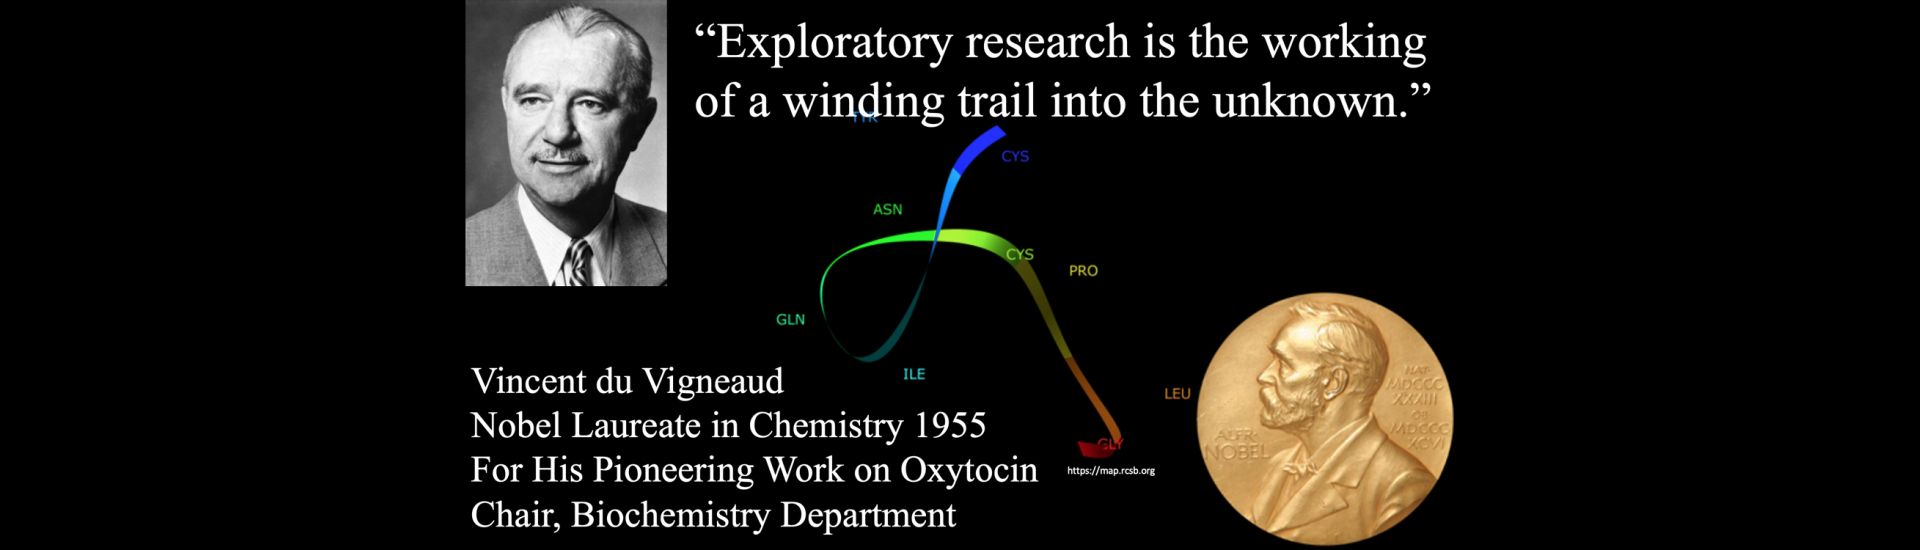 Vigneaud photo and text that reads: "Exploratory research is the working of a winding trail into the unknown"